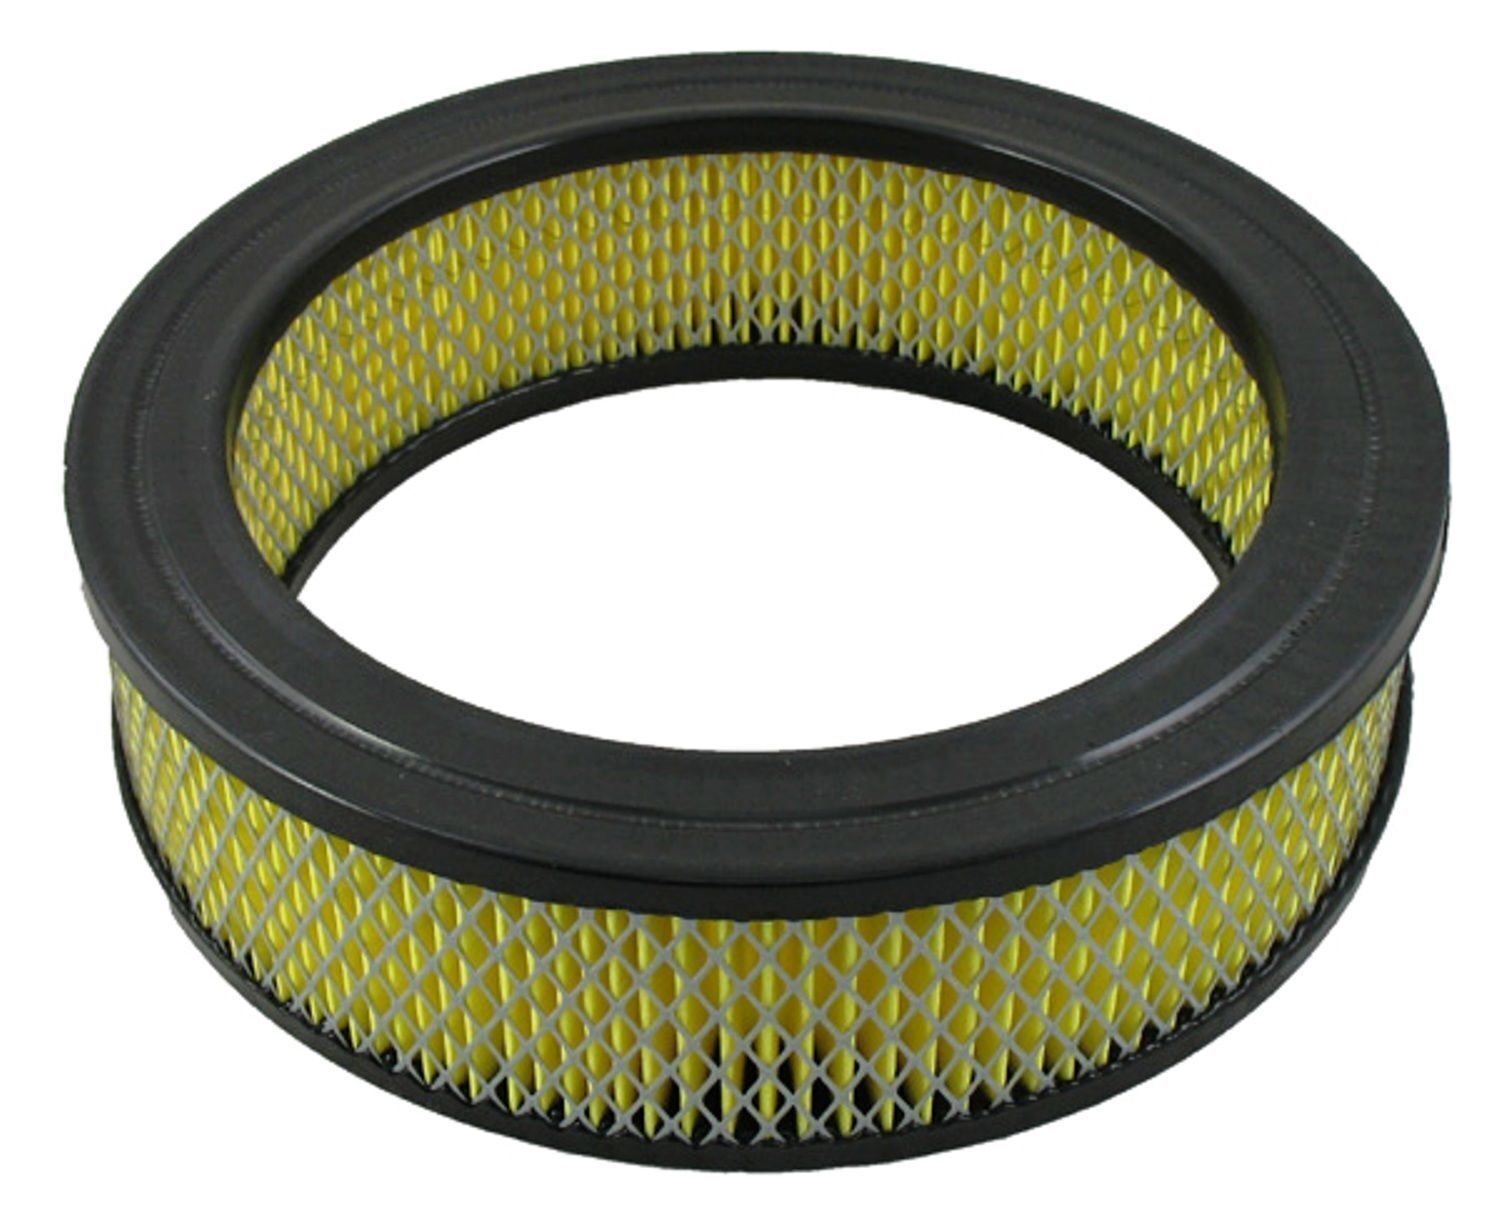 Air Filter for Dodge Dakota 1987-1996 with 3.9L 6cyl Engine